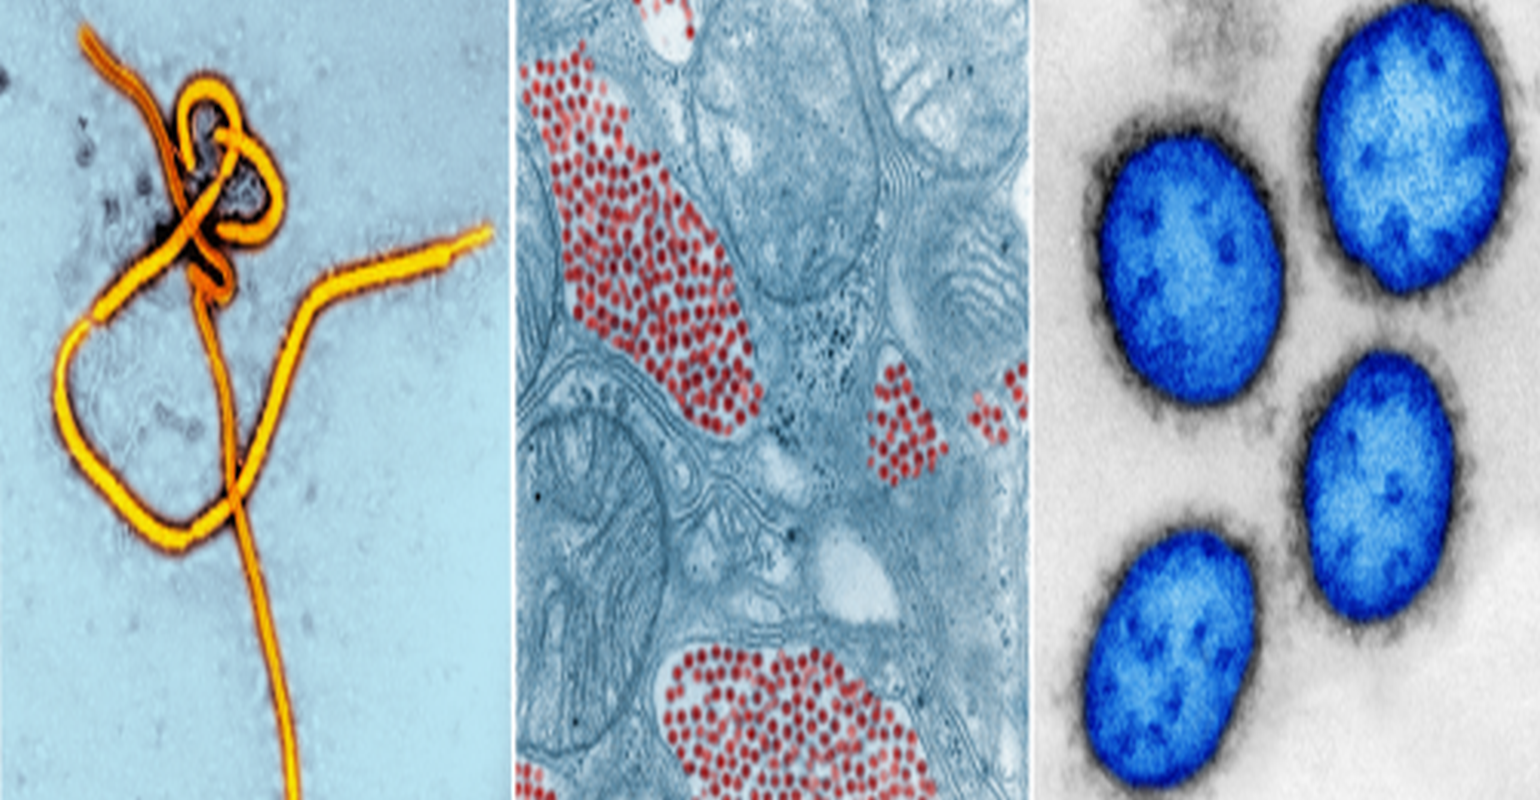 NIH Awards Grant to Establish Global Consortium to Develop Treatments for Viral Threats